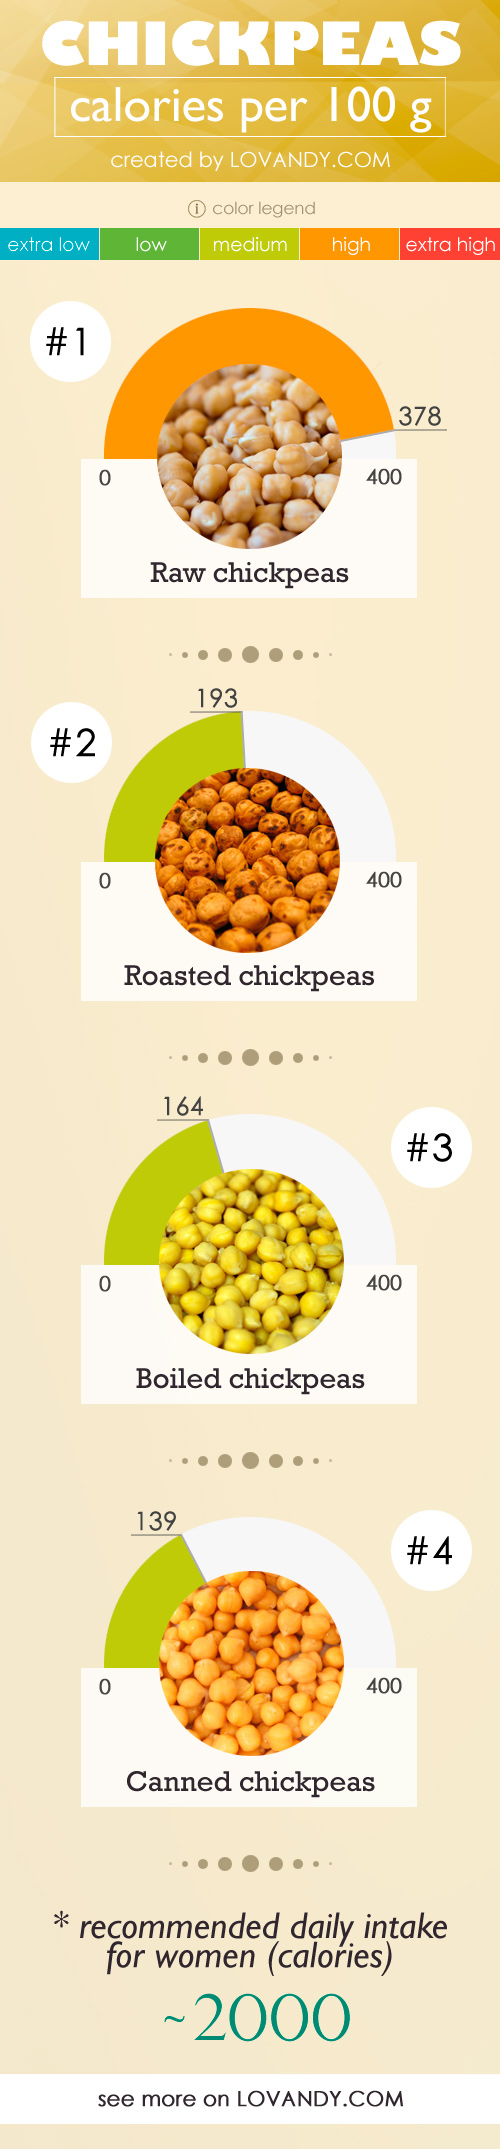 Baked Chickpeas Nutrition